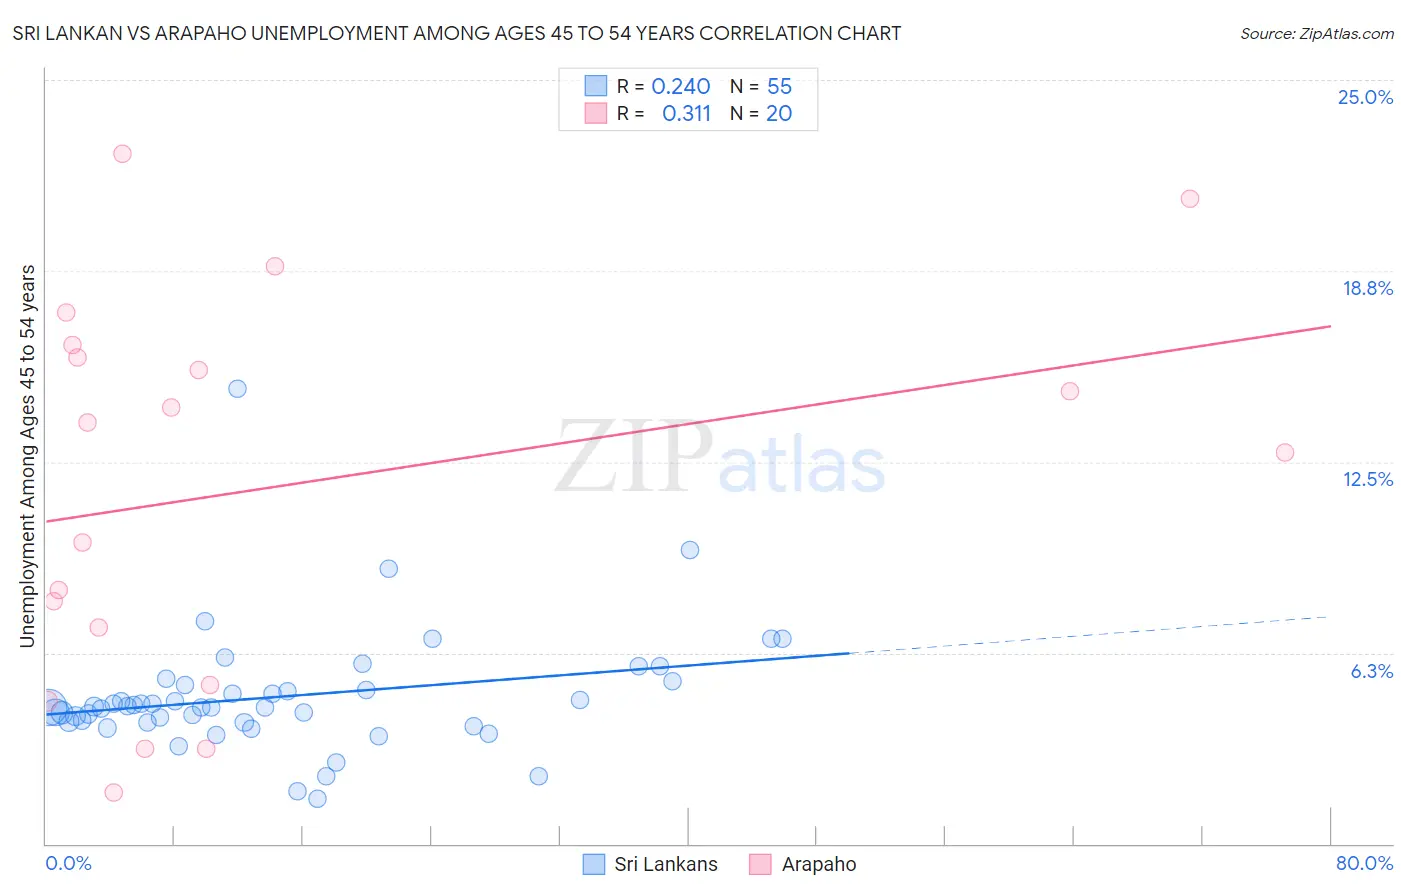 Sri Lankan vs Arapaho Unemployment Among Ages 45 to 54 years